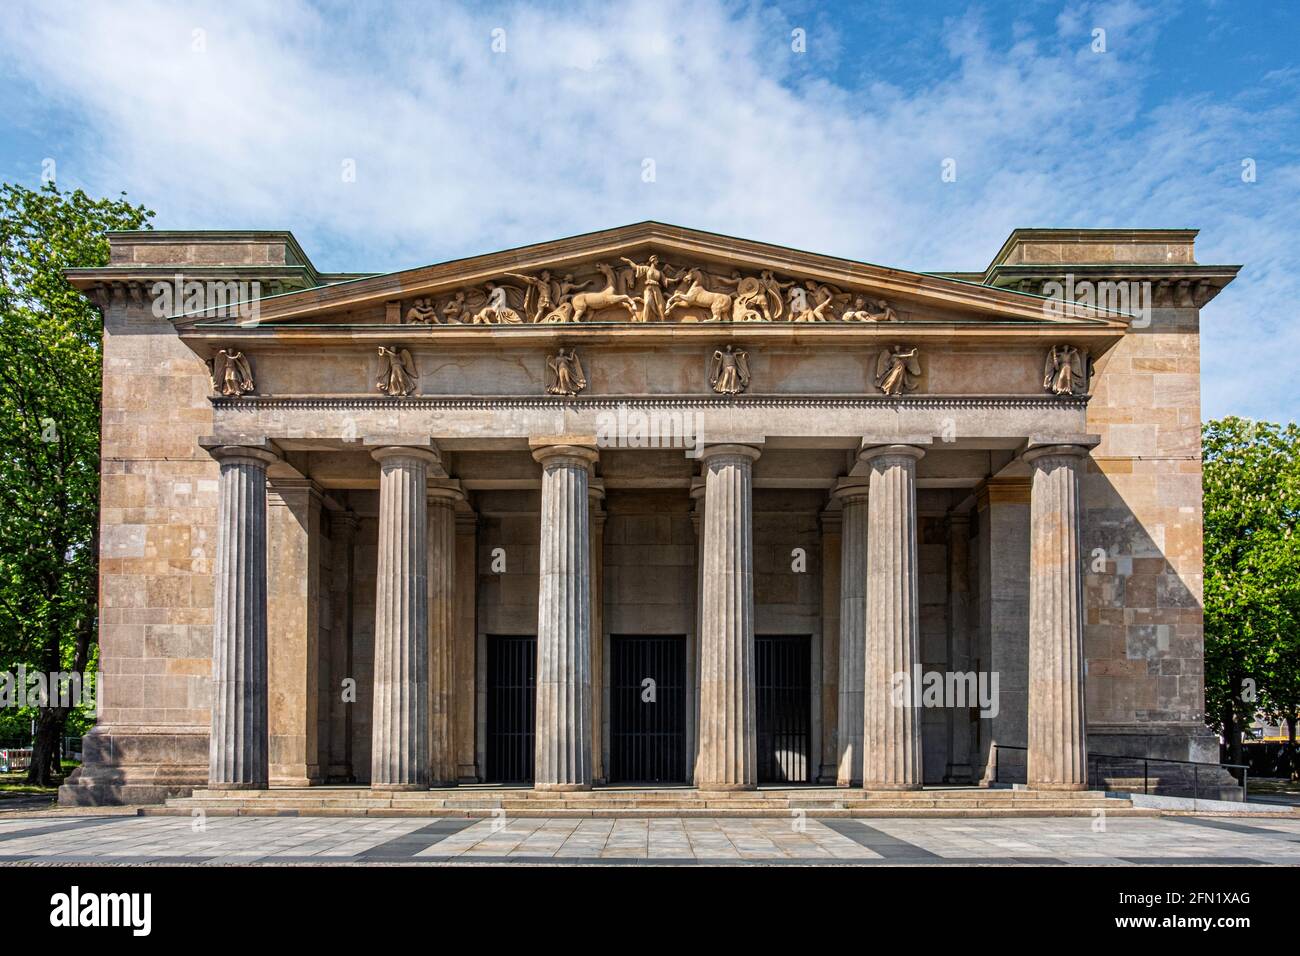 Neue Wache, New Guardhouse building exterior view built 1816-18 in Unter den Linden, Mitte, Berlin. Prussian Neoclassical architecture, architect Karl Stock Photo